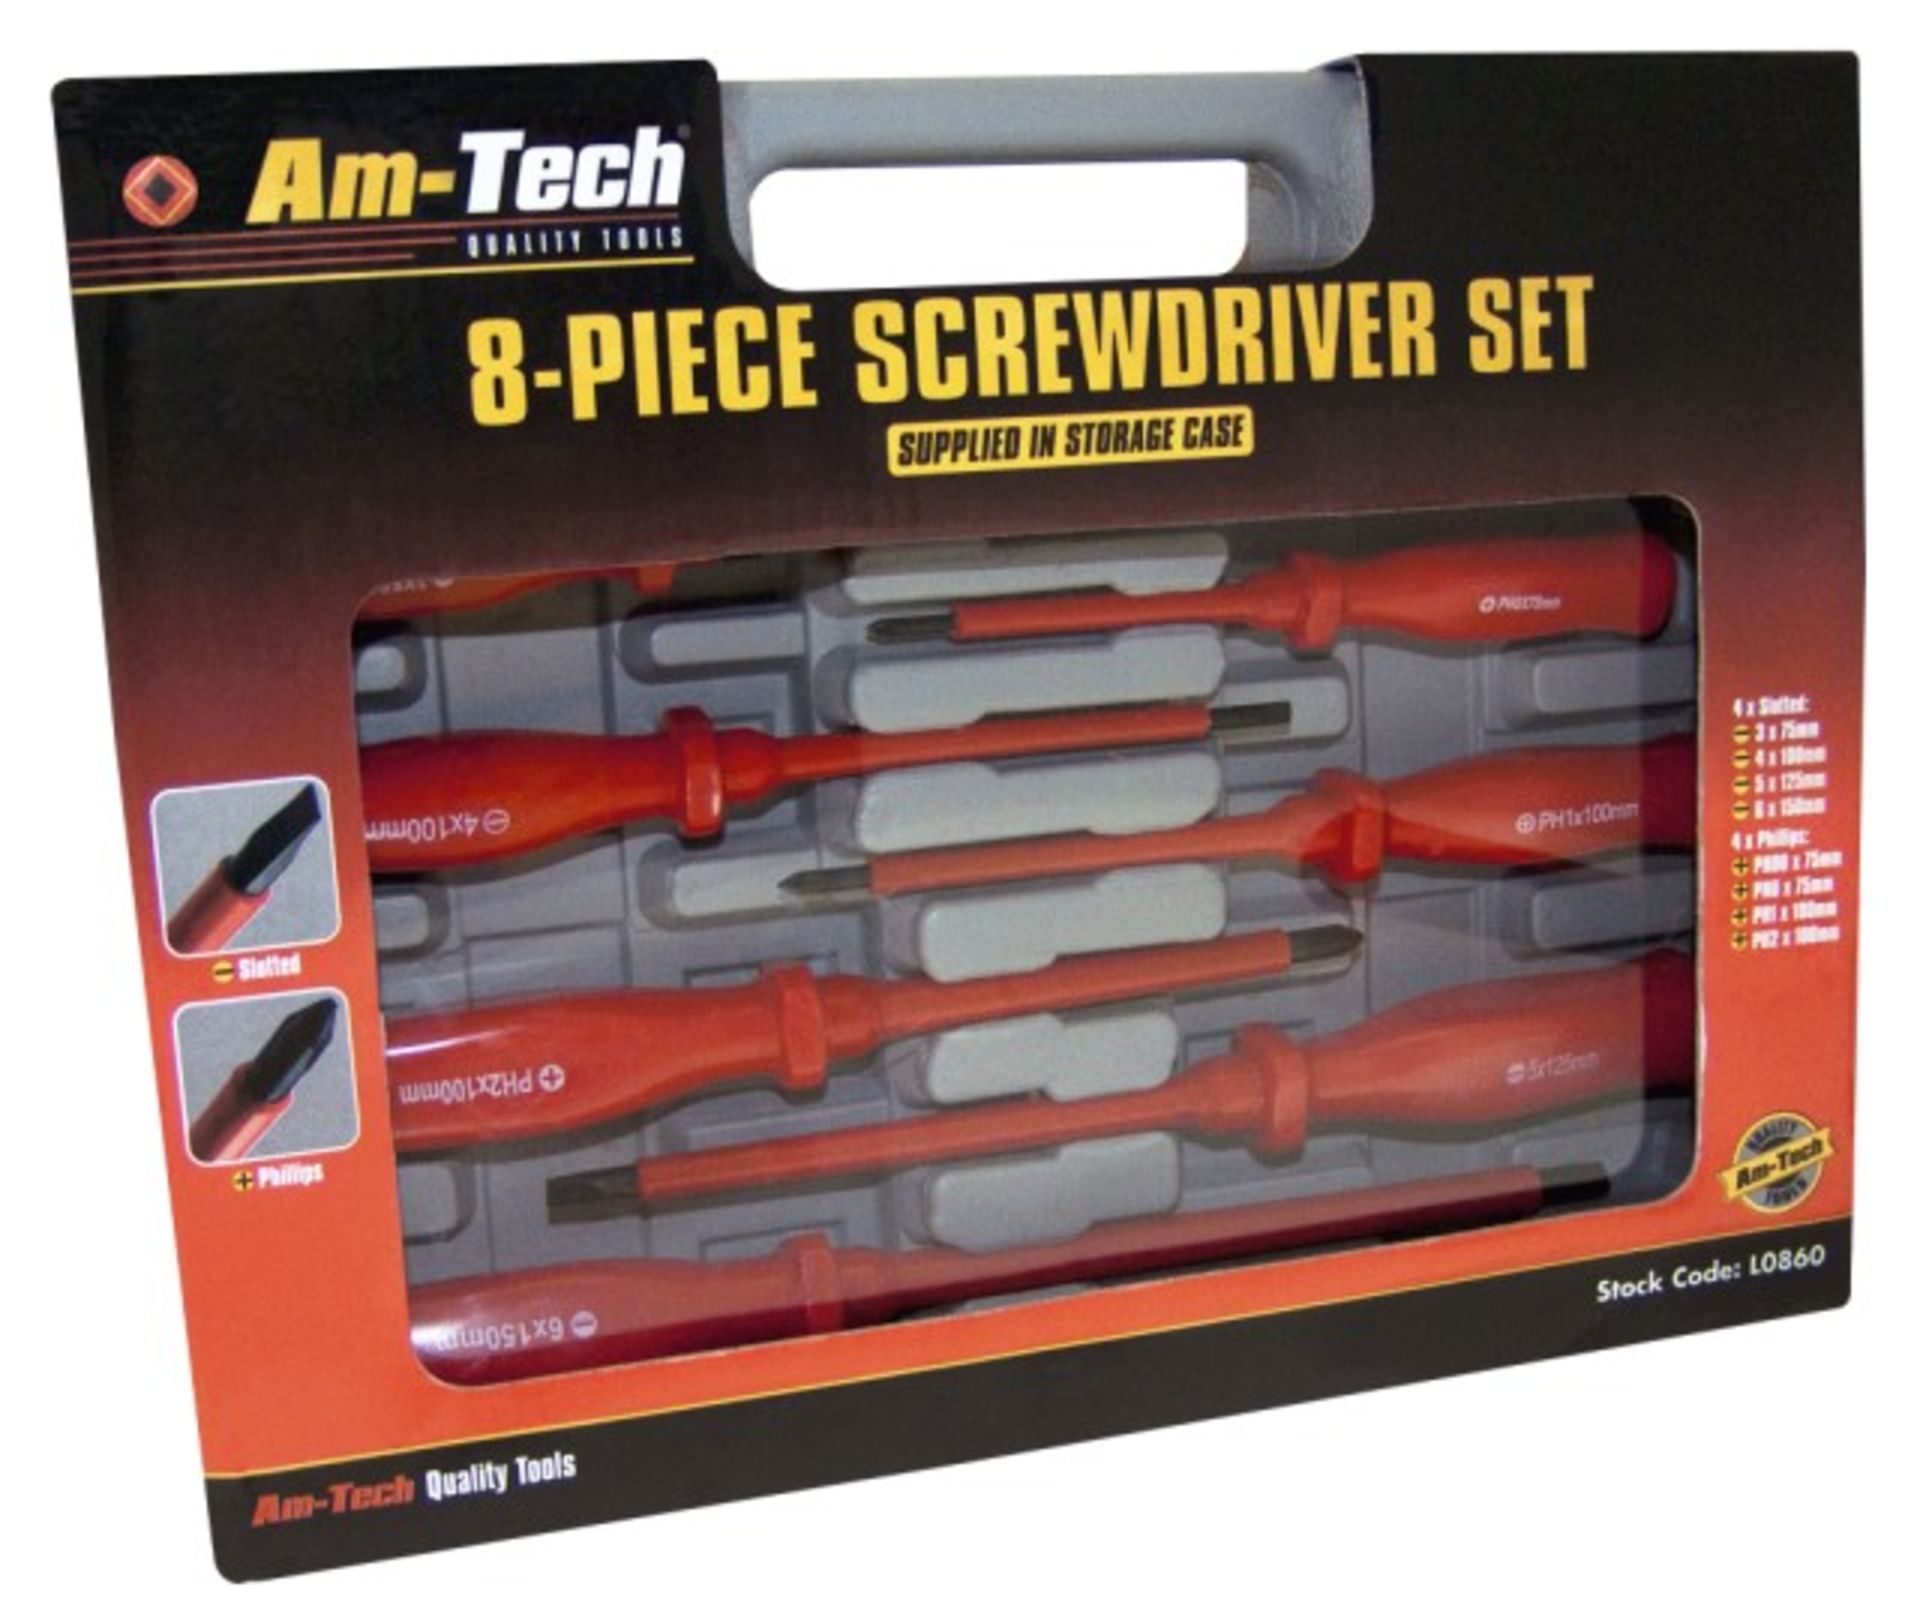 V *TRADE QTY* Brand New Eight Piece Screwdriver Set In Carry case X 7 YOUR BID PRICE TO BE